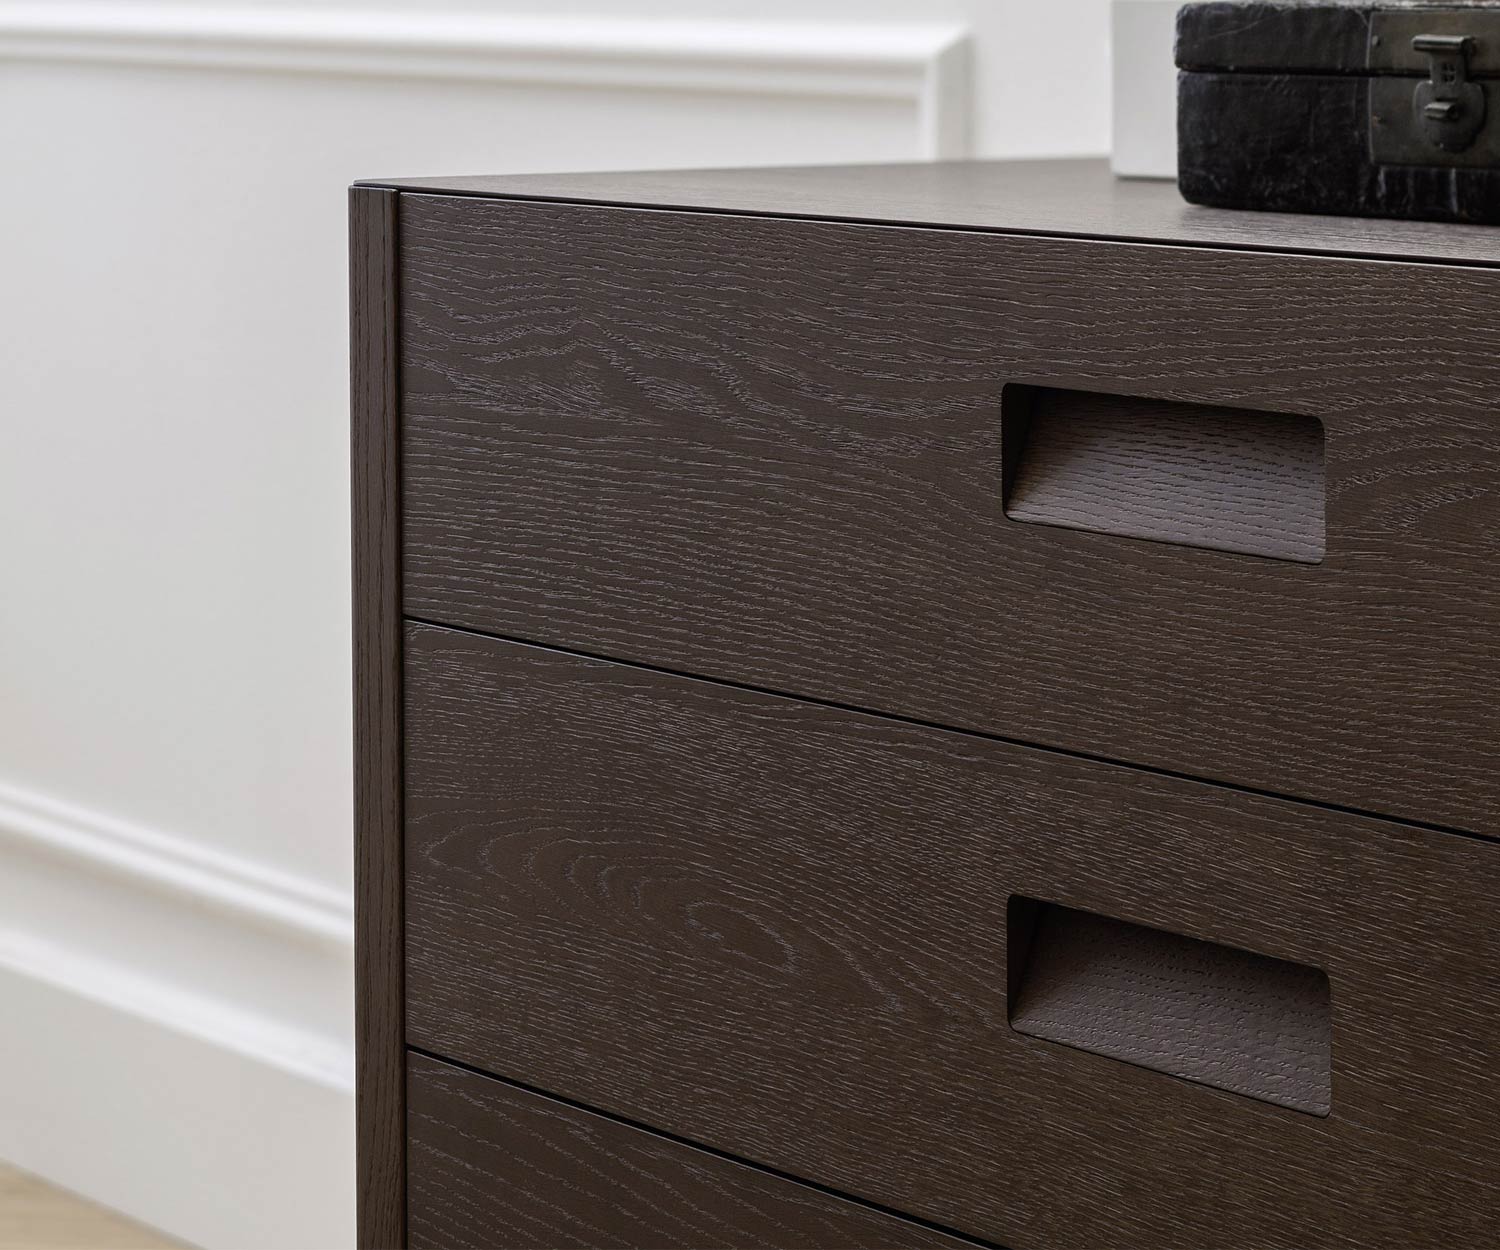 Exclusive Novamobili Design chest of drawers Giotto 3 drawers dark oak